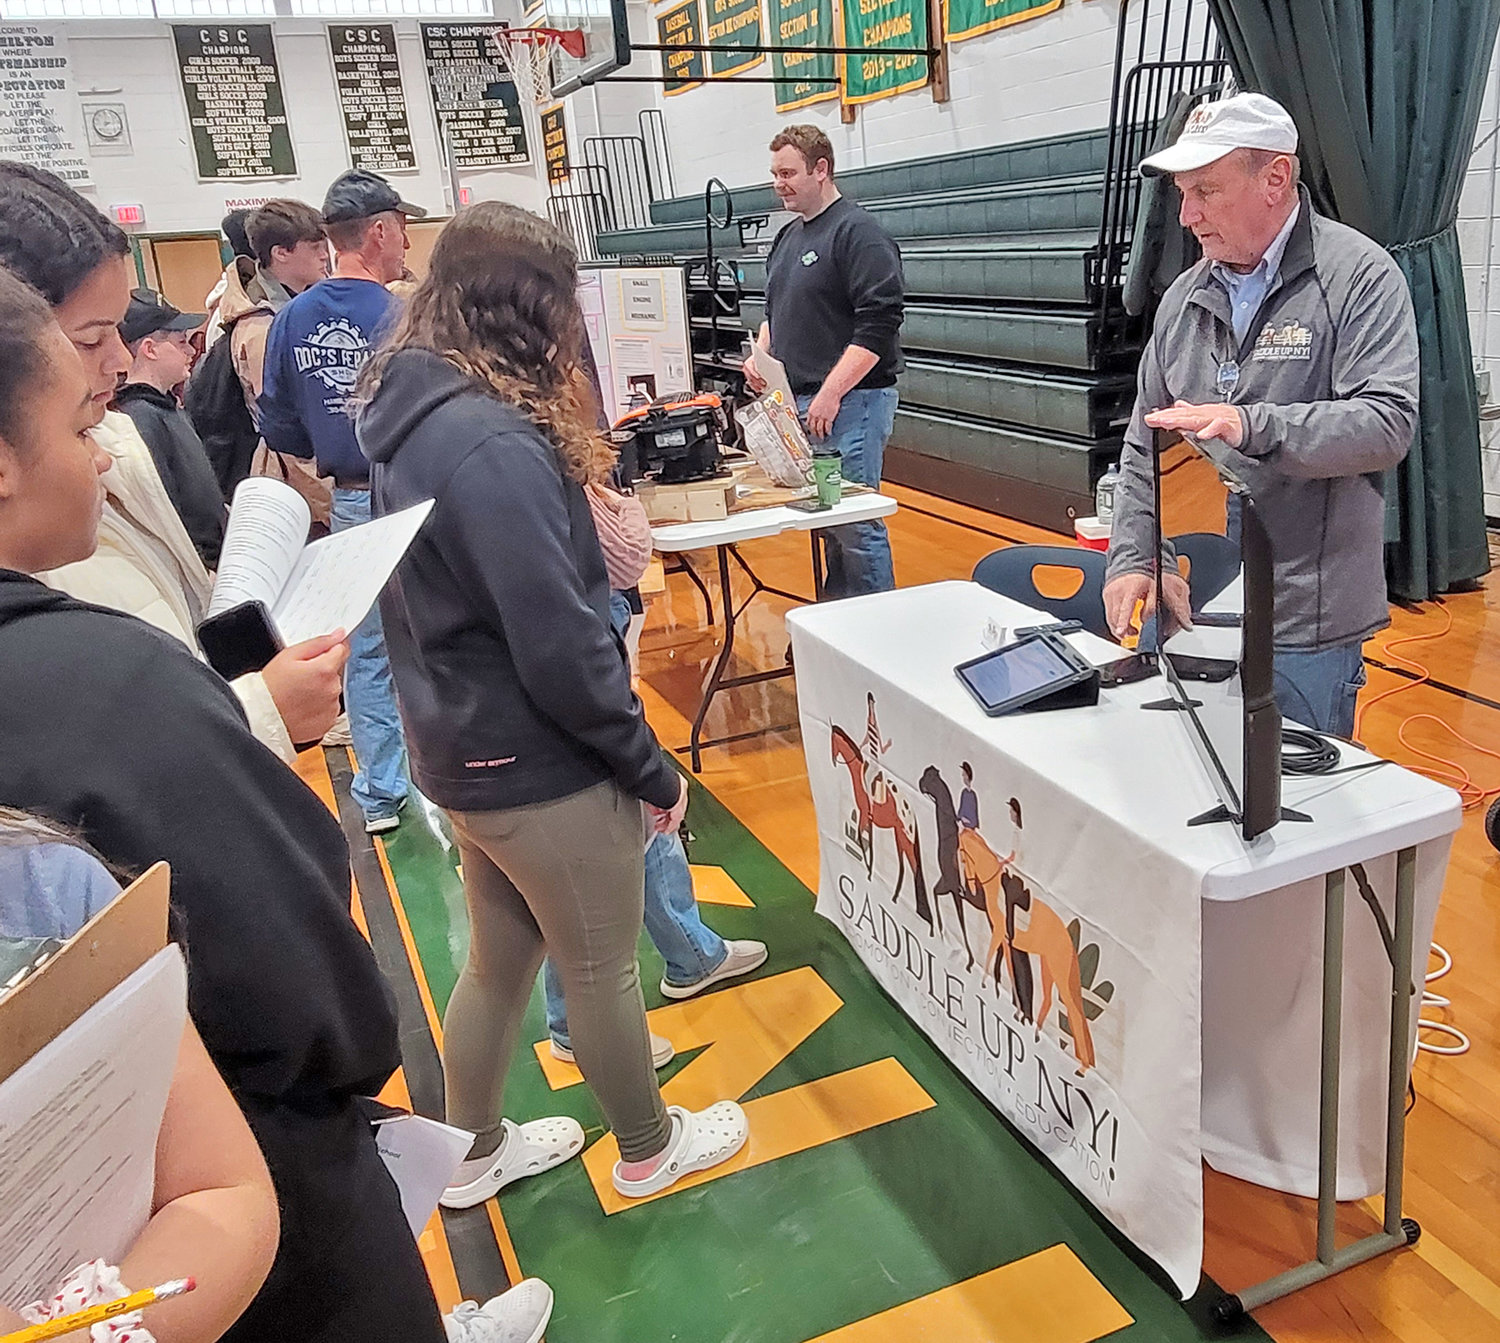 Saddle Up New York was one of dozens of exhibitors Nov. 18 as Hamilton Central School hosted its first Career Fair for students in fifth through 12th grade.